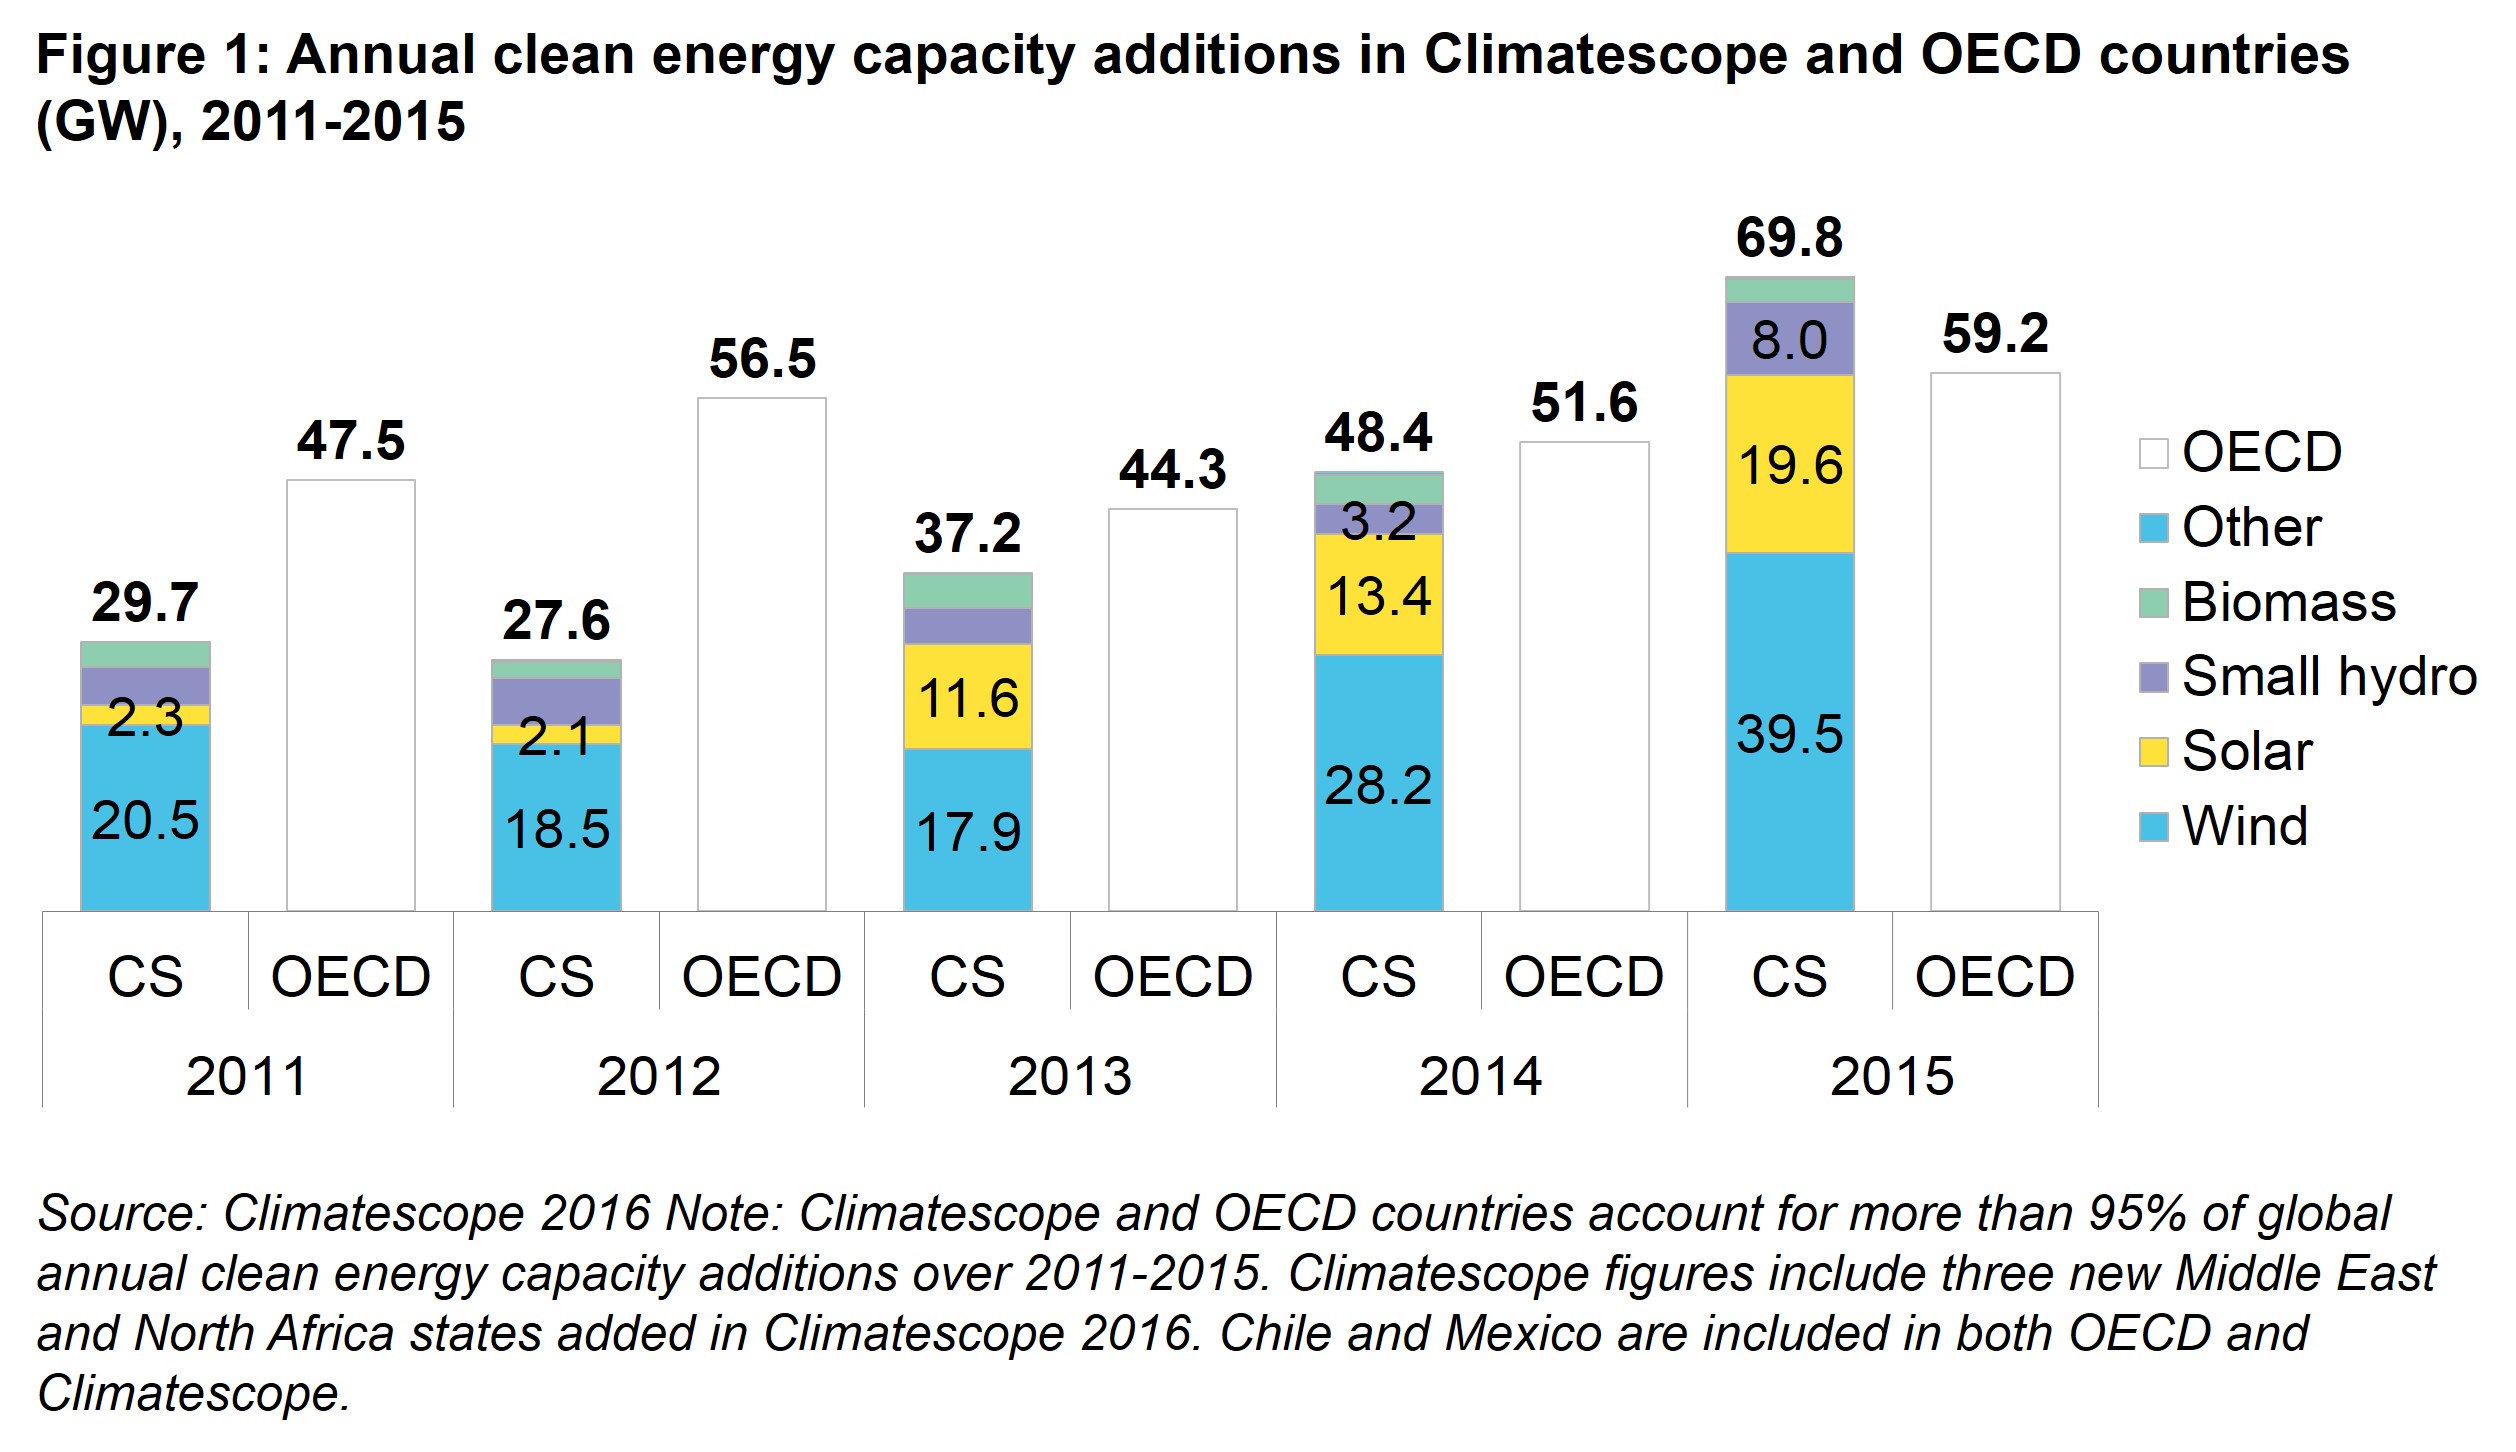 climatesope capacity additions